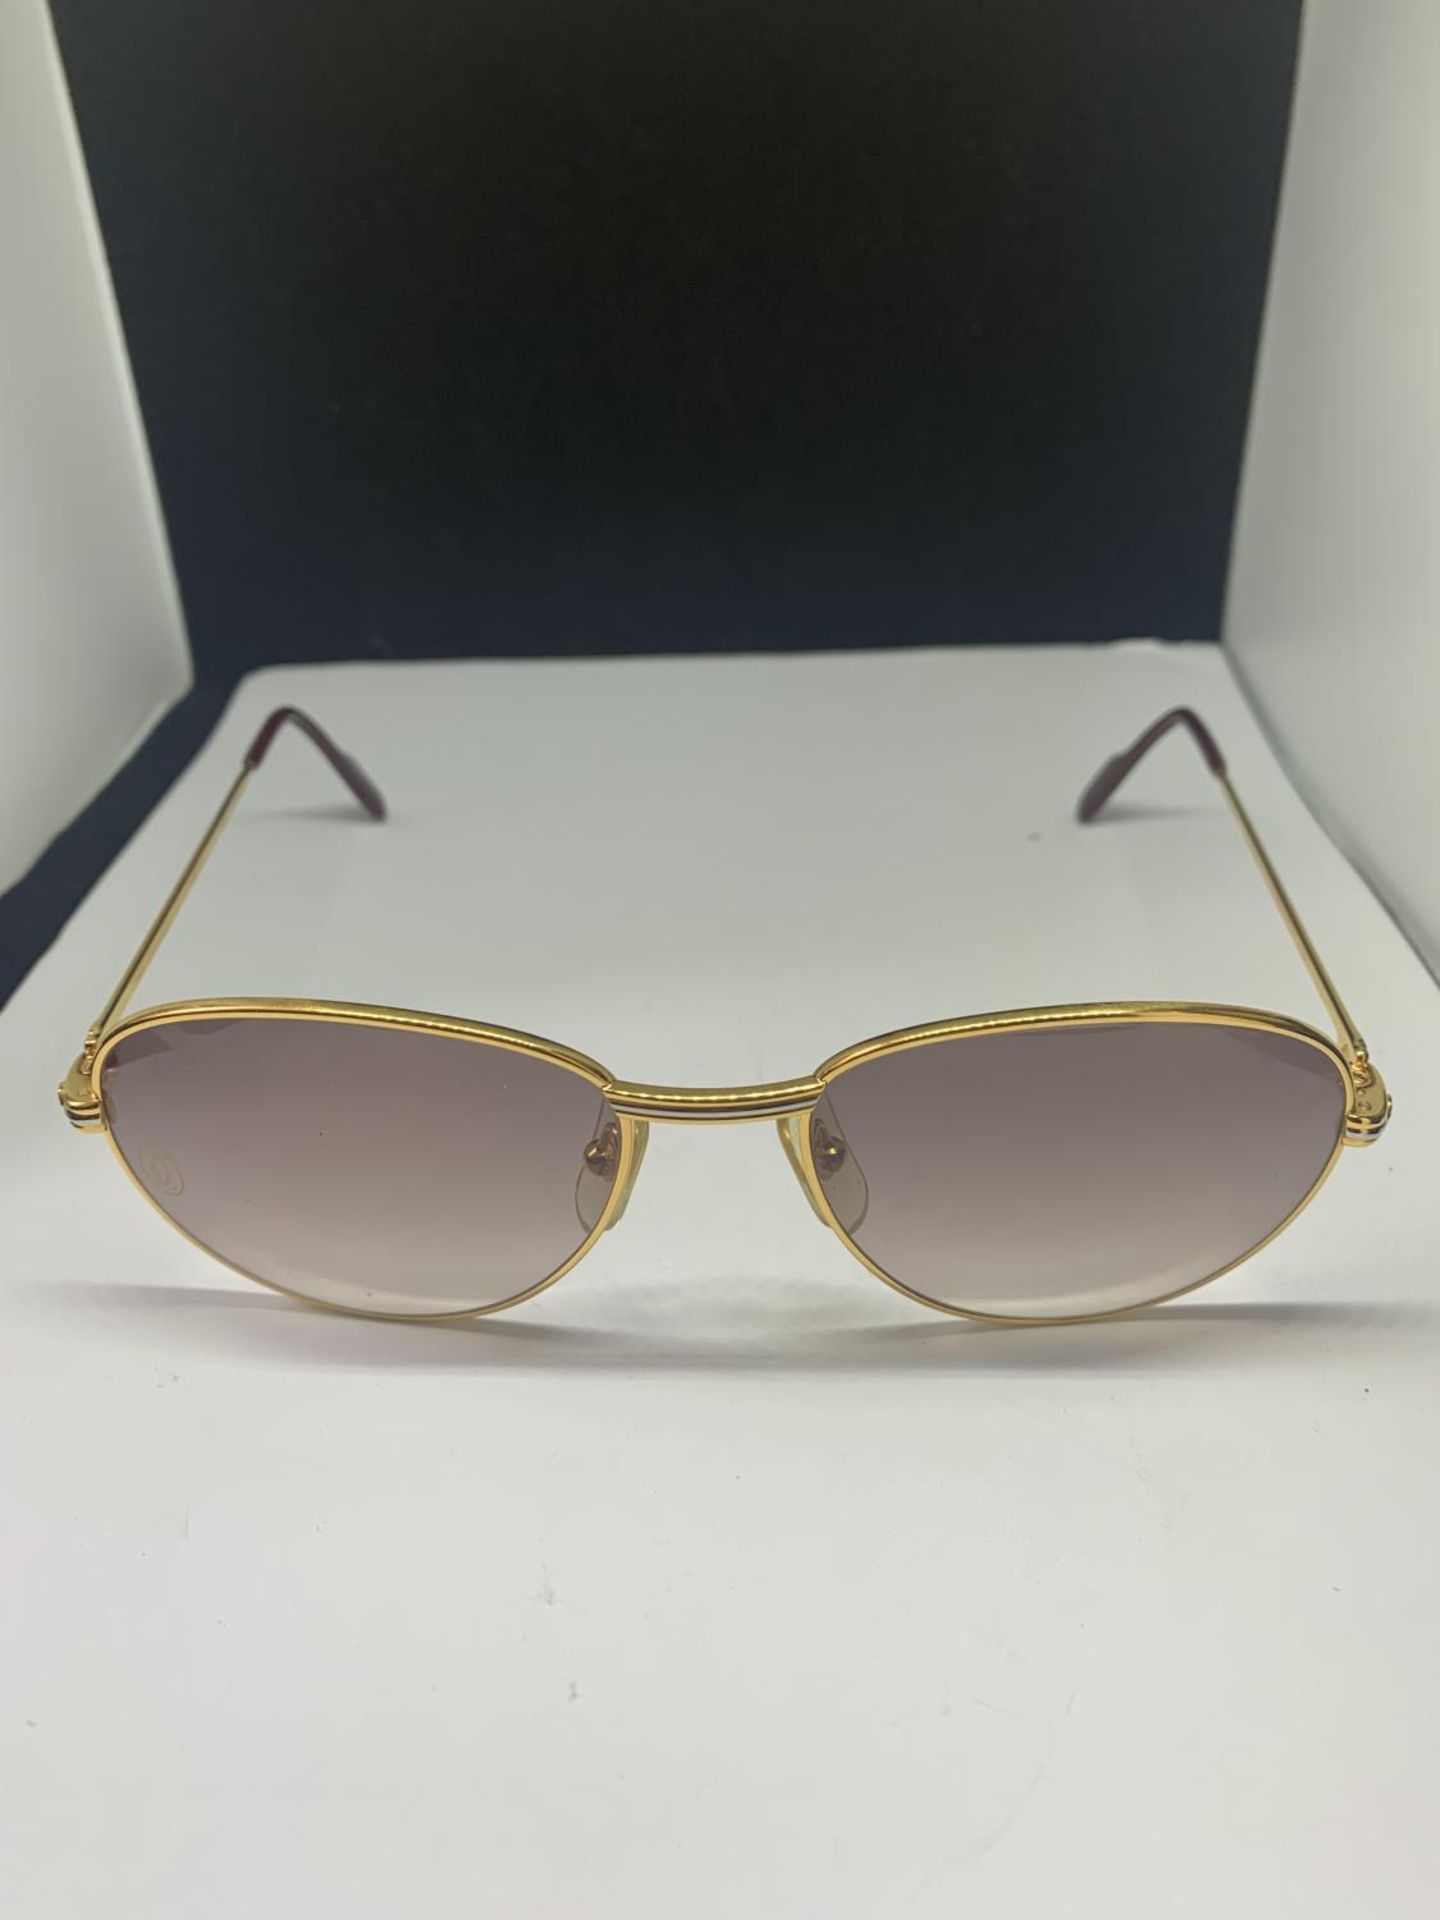 A PAIR OF MUST DE CARTIER PARIS SUNGLASSES WITH DIAMOND DECORATION TO THE SIDE. ORIGINAL BOX AND - Image 8 of 22